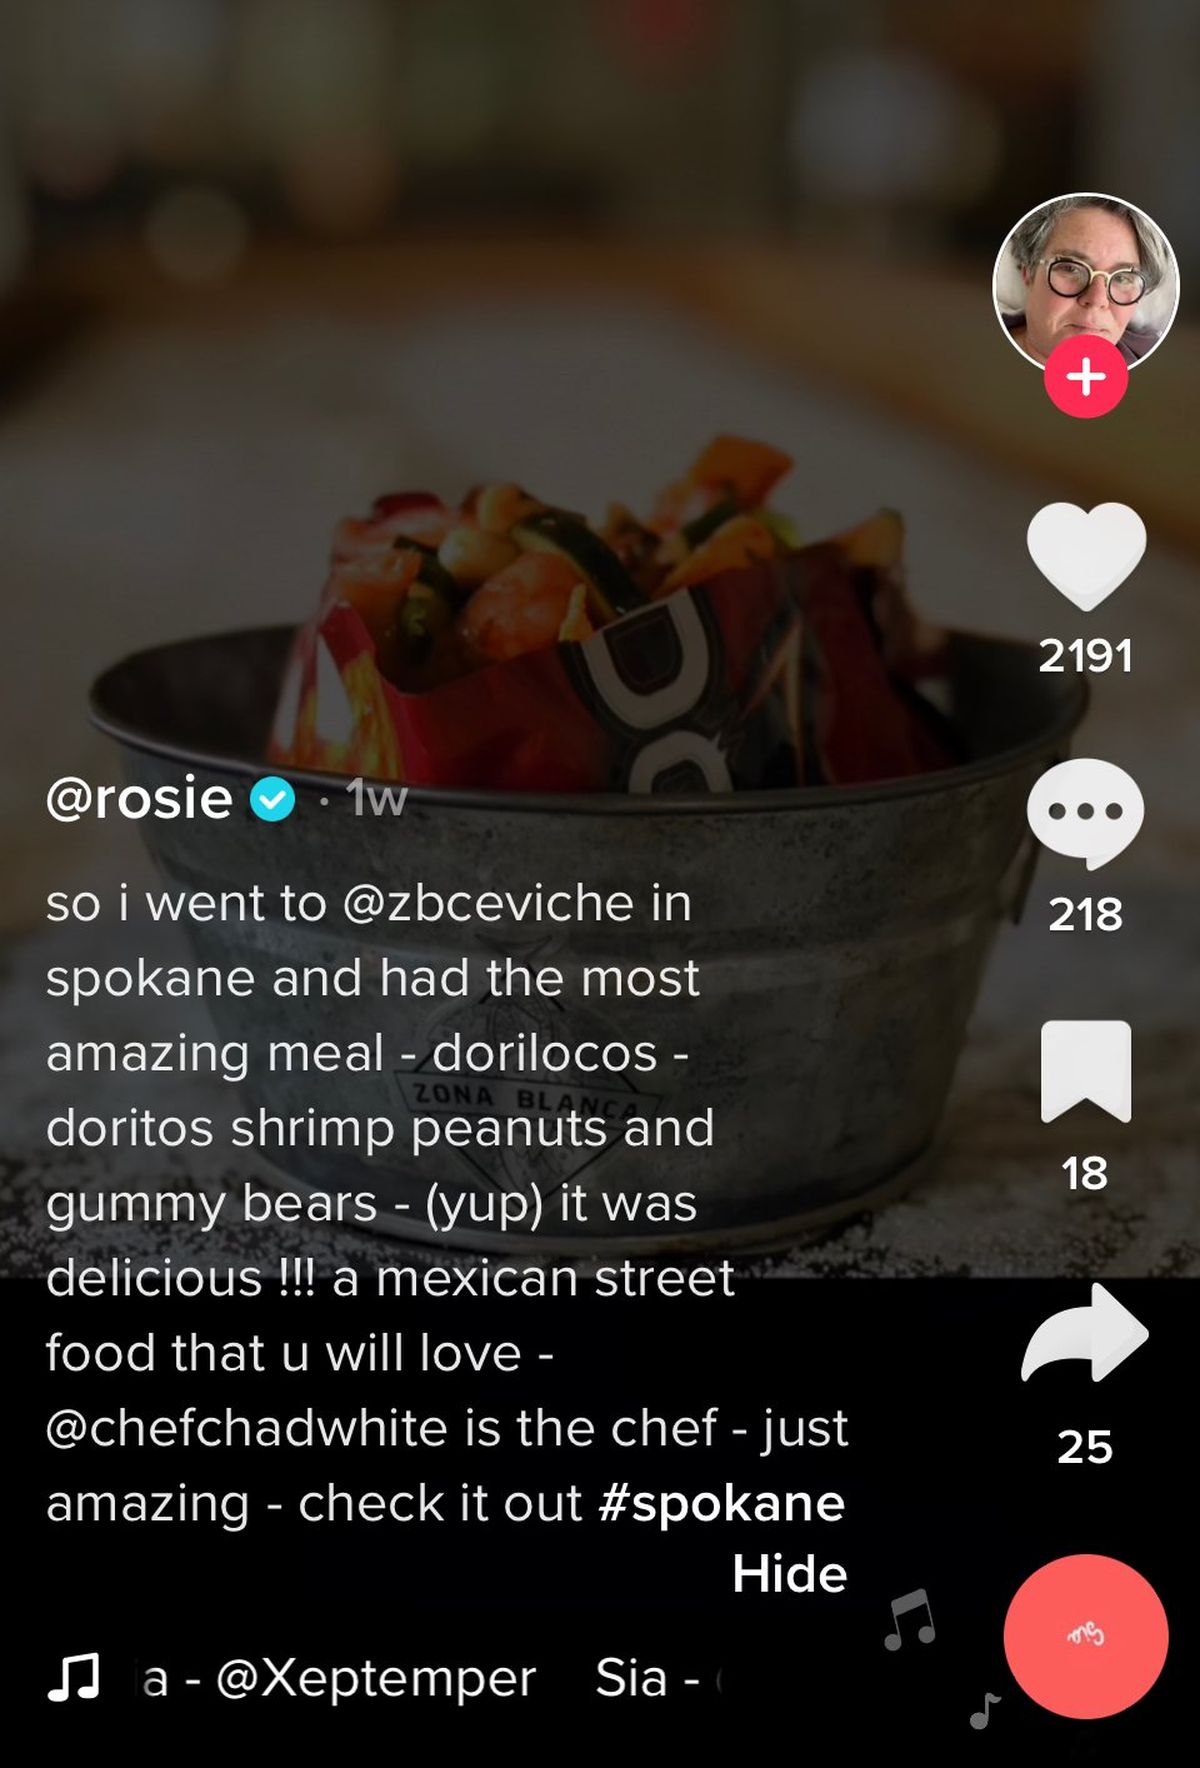 Rosie O’Donnell recently visited Spokane and enjoyed the Dorilocos at Zona Blaca. She posted about the meal on the TikTok feed. 